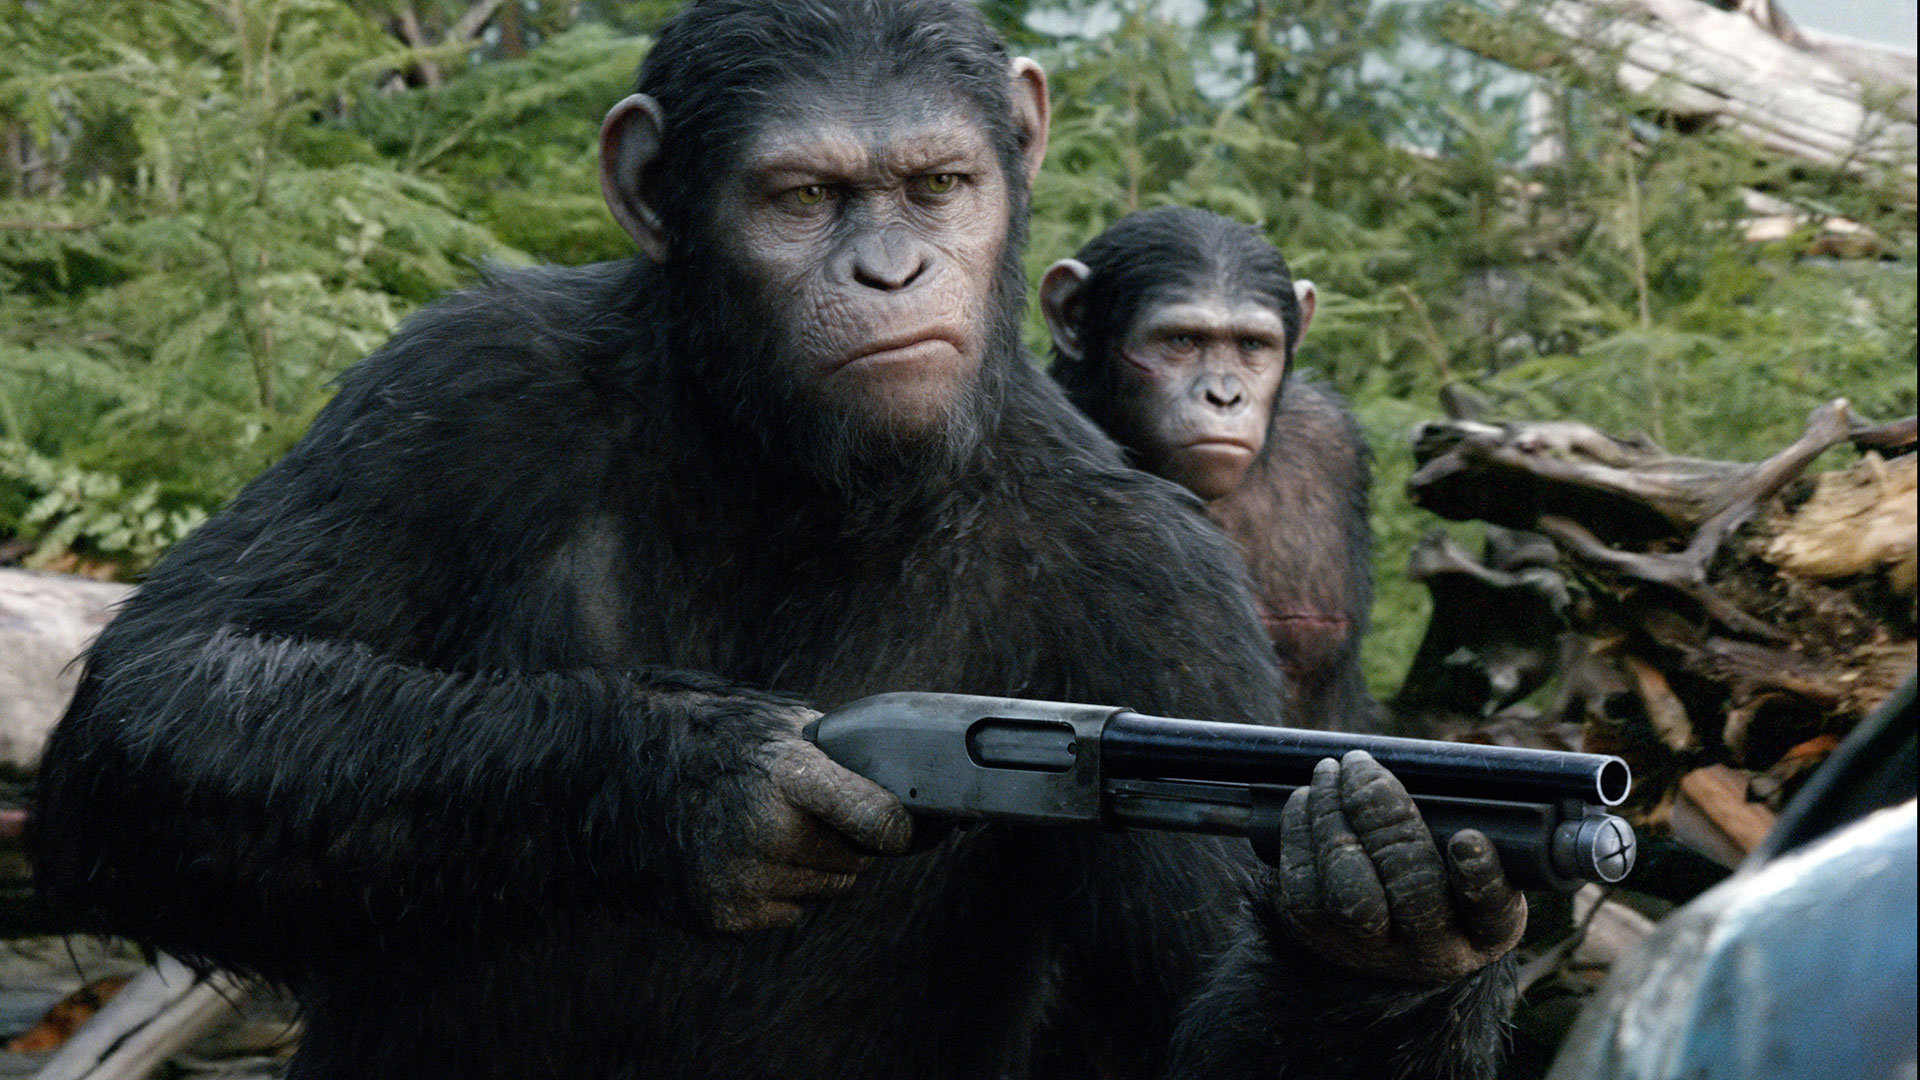 Free Download Dawn Of The Planet Of The Apes Wallpaper - Dawn Of The Planet Of The Apes - HD Wallpaper 